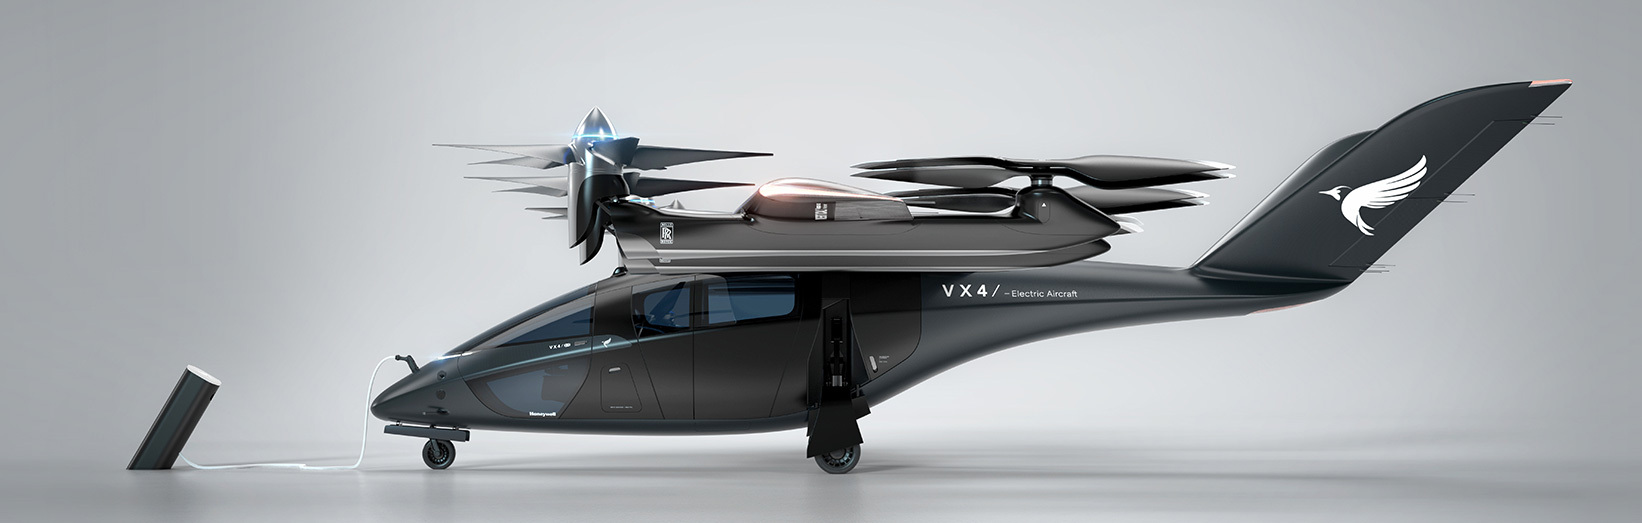 The VX4, the electric vertical takeoff and landing (eVTOL) aircraft under development that is the backbone of the project